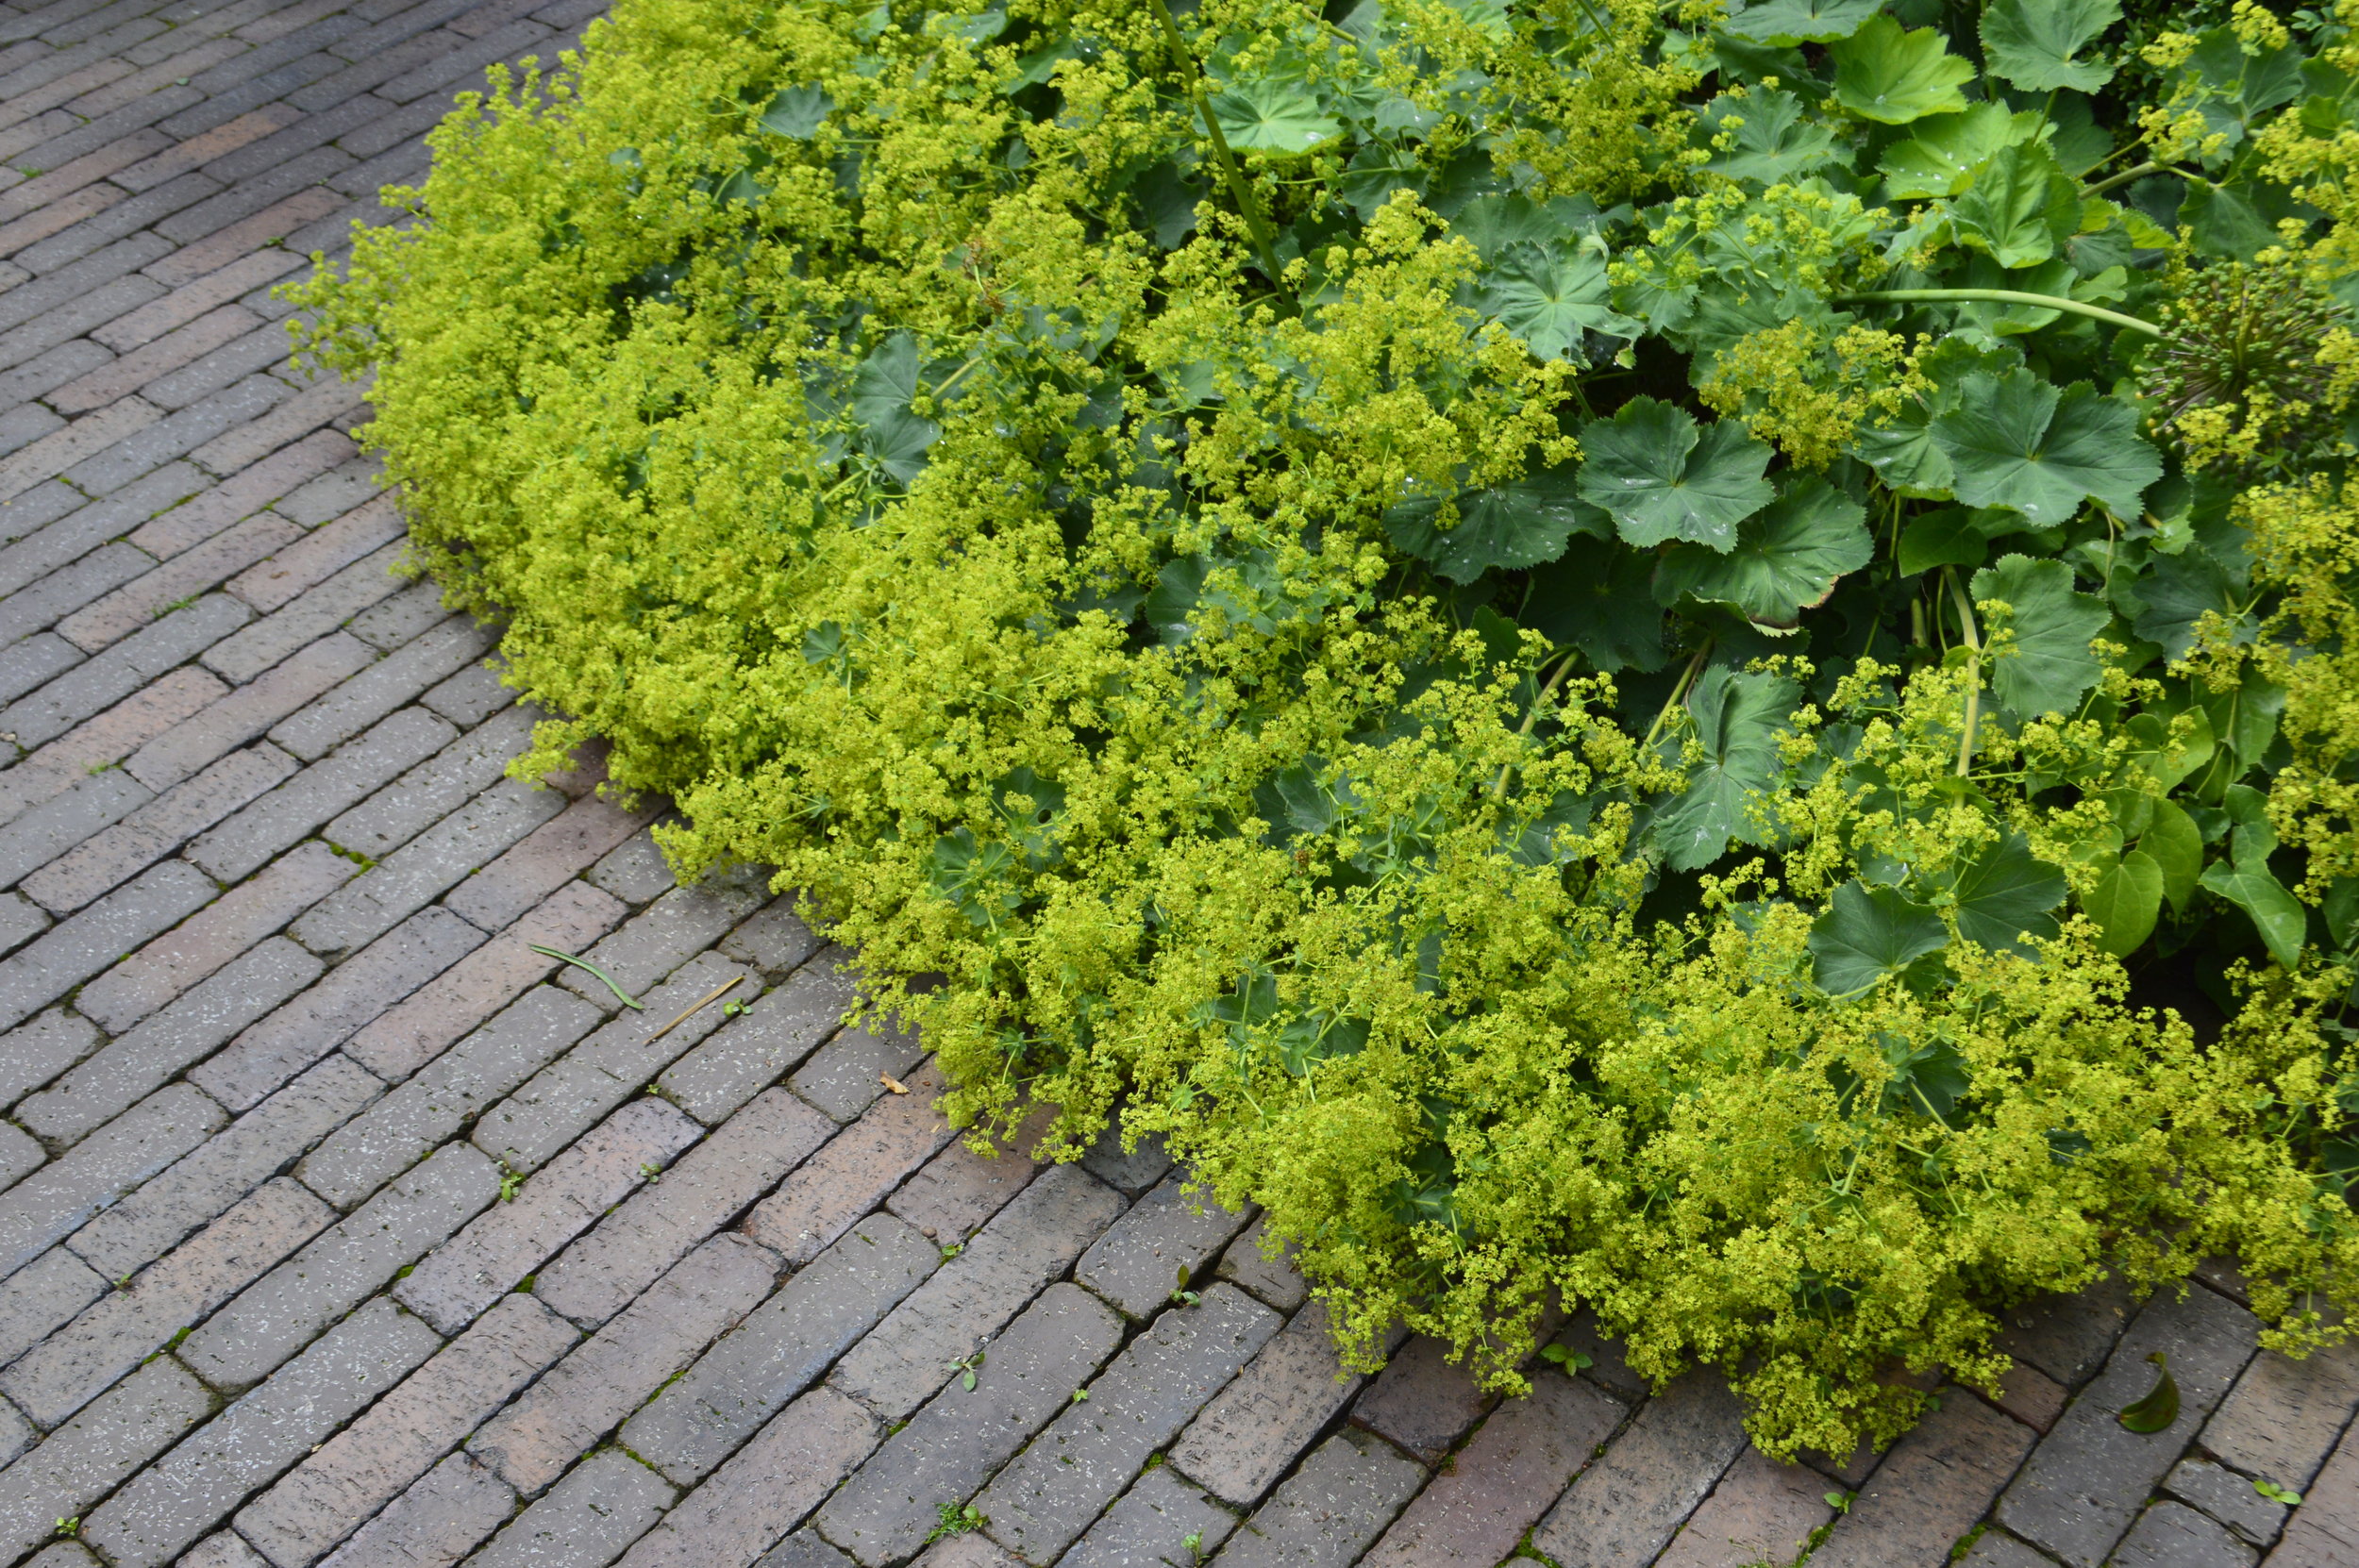 Edging - the froth of the alchemilla spills over the drive edge